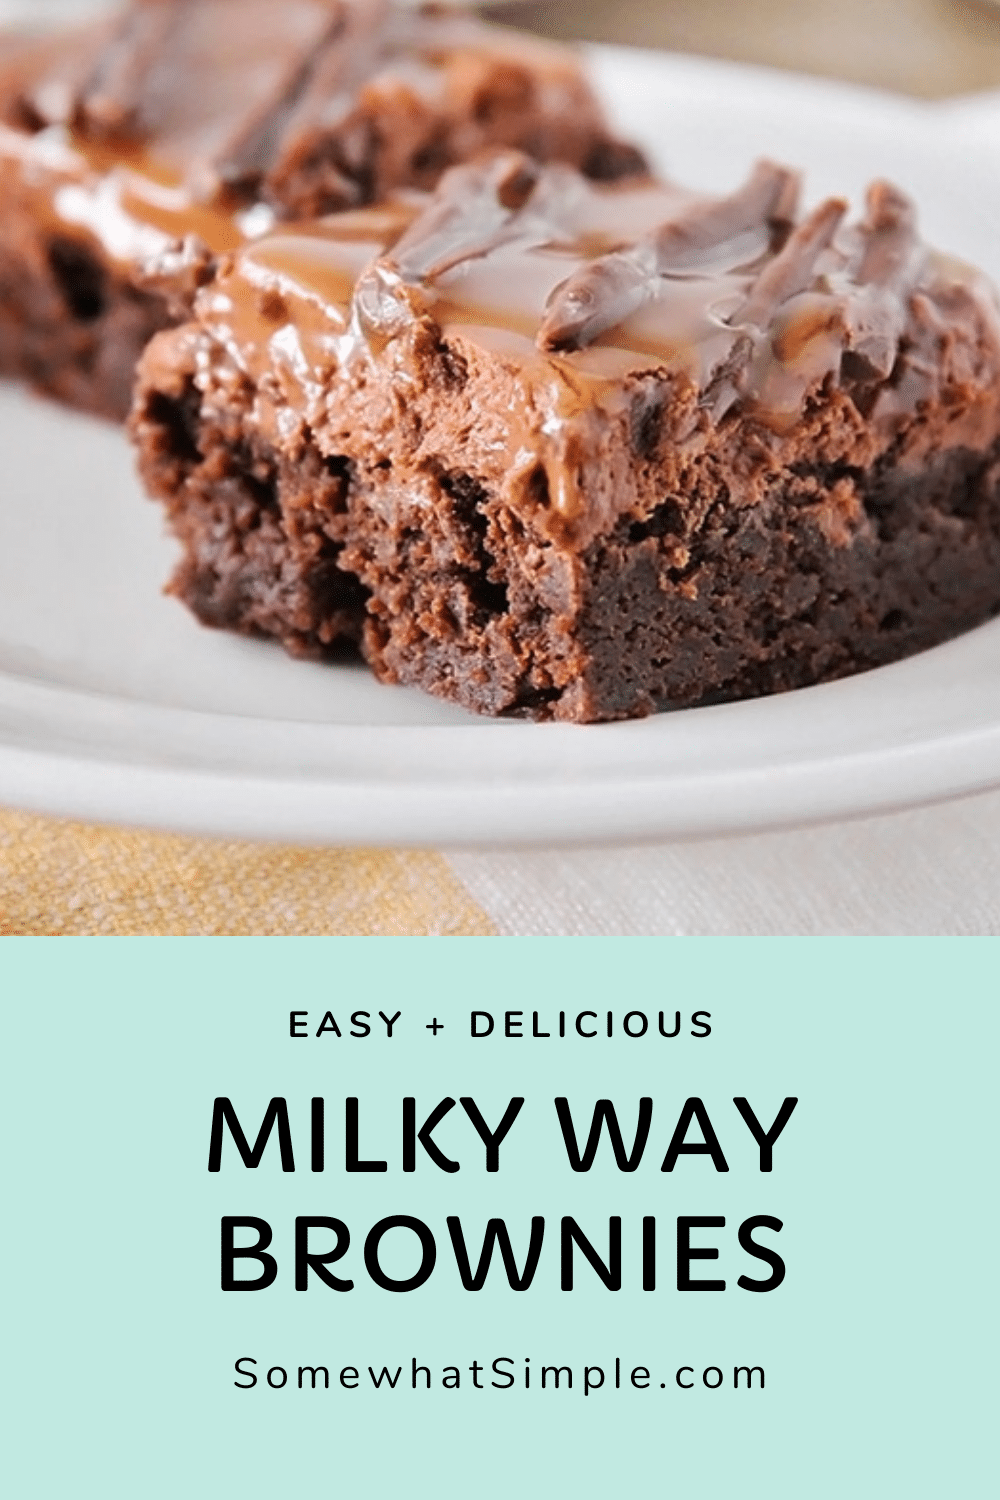 These Milky Way brownies are incredibly delicious and the perfect way to enjoy the flavors of your favorite candy bar in an amazing brownie. These brownies are rich and delicious and topped with caramel and milk chocolate. They're an indulgent treat for any chocolate lover! via @somewhatsimple